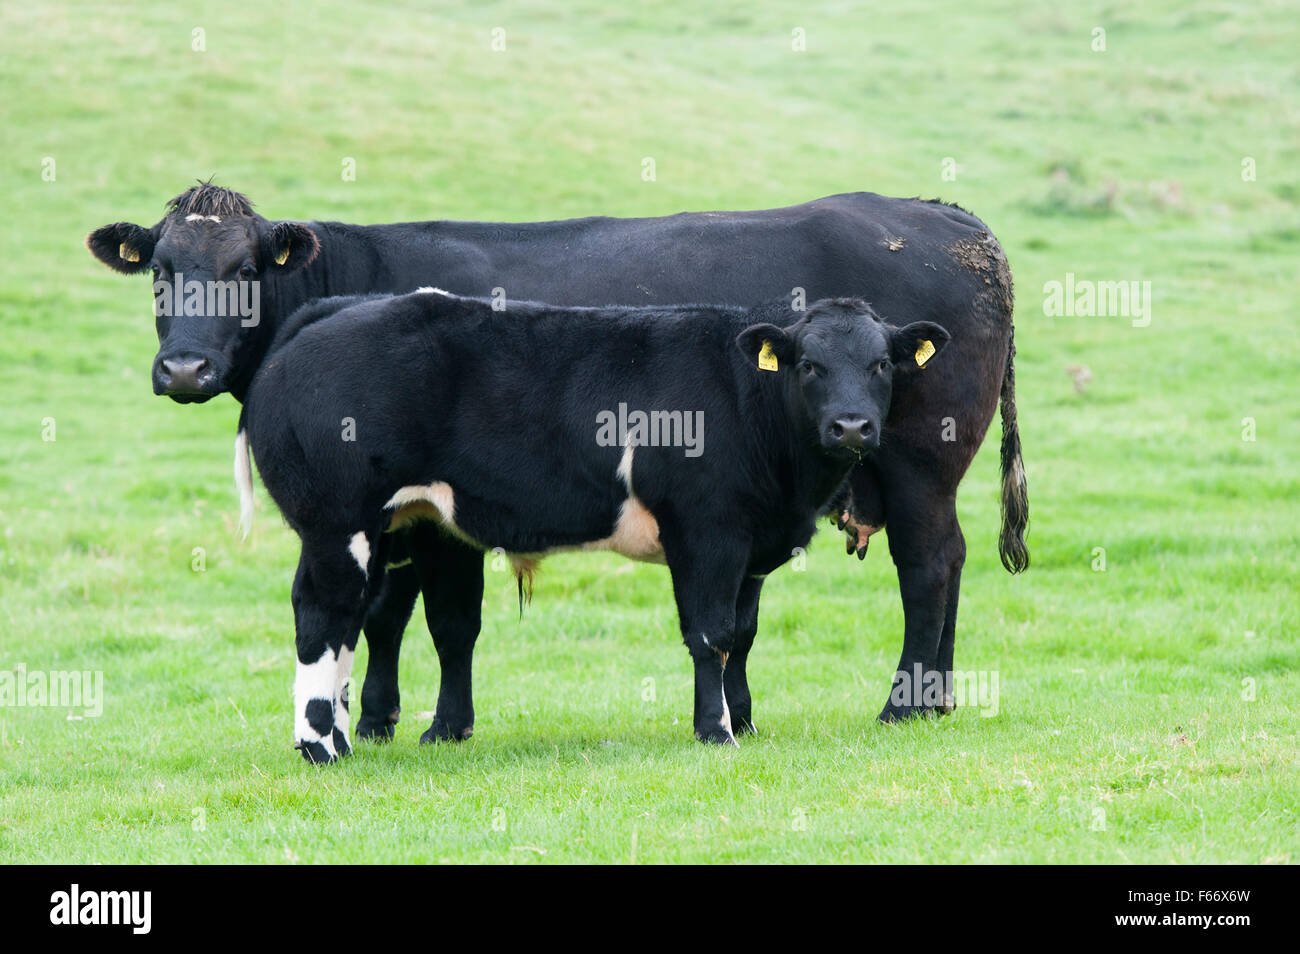 Upland suckler beef production, with cows and calves inpastures, North Yorkshire, UK. Stock Photo